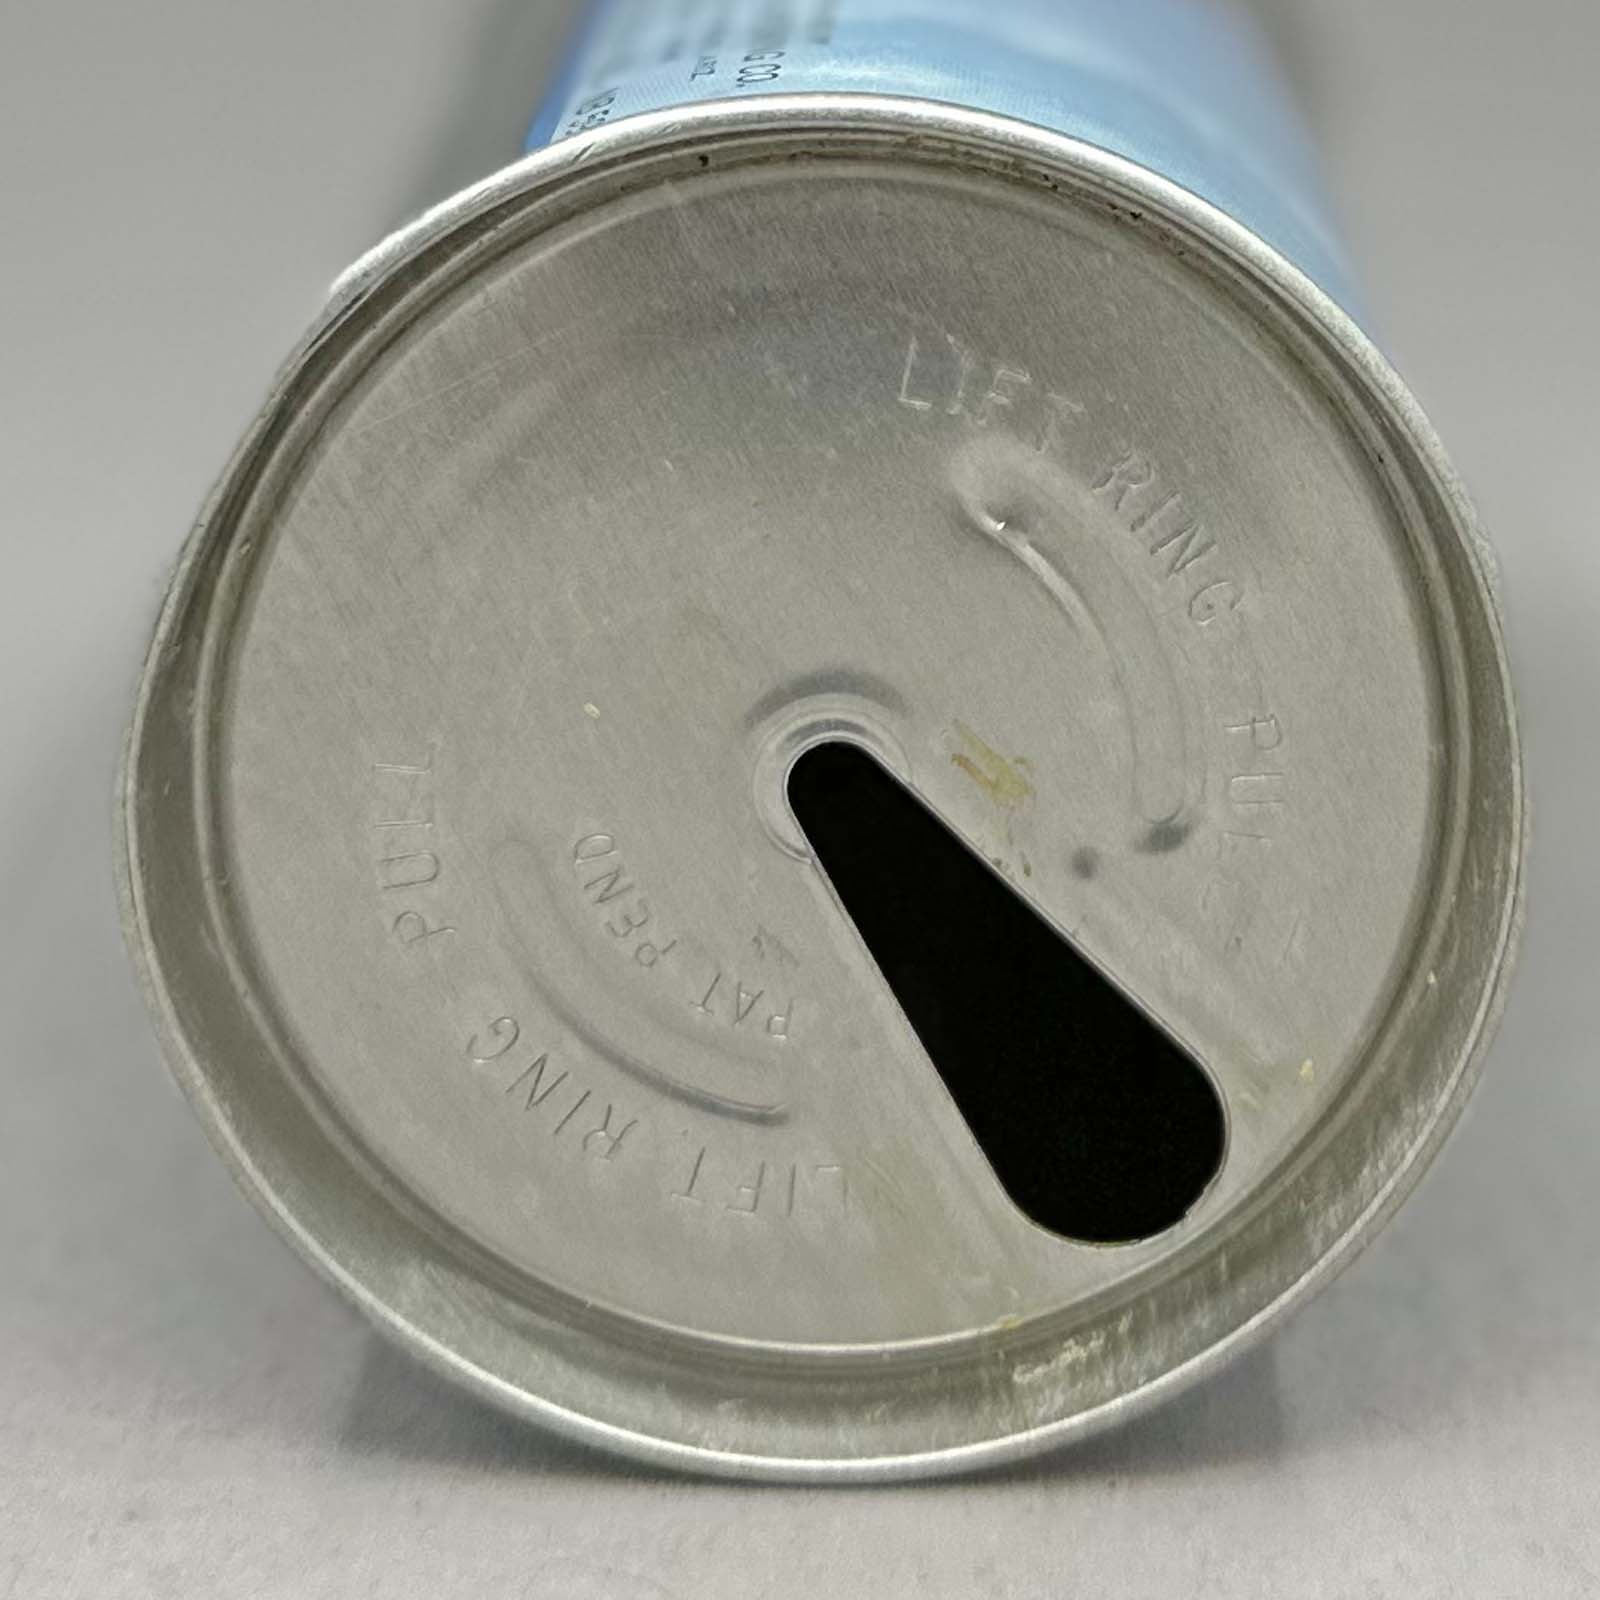 007 82-28 pull tab beer can 5